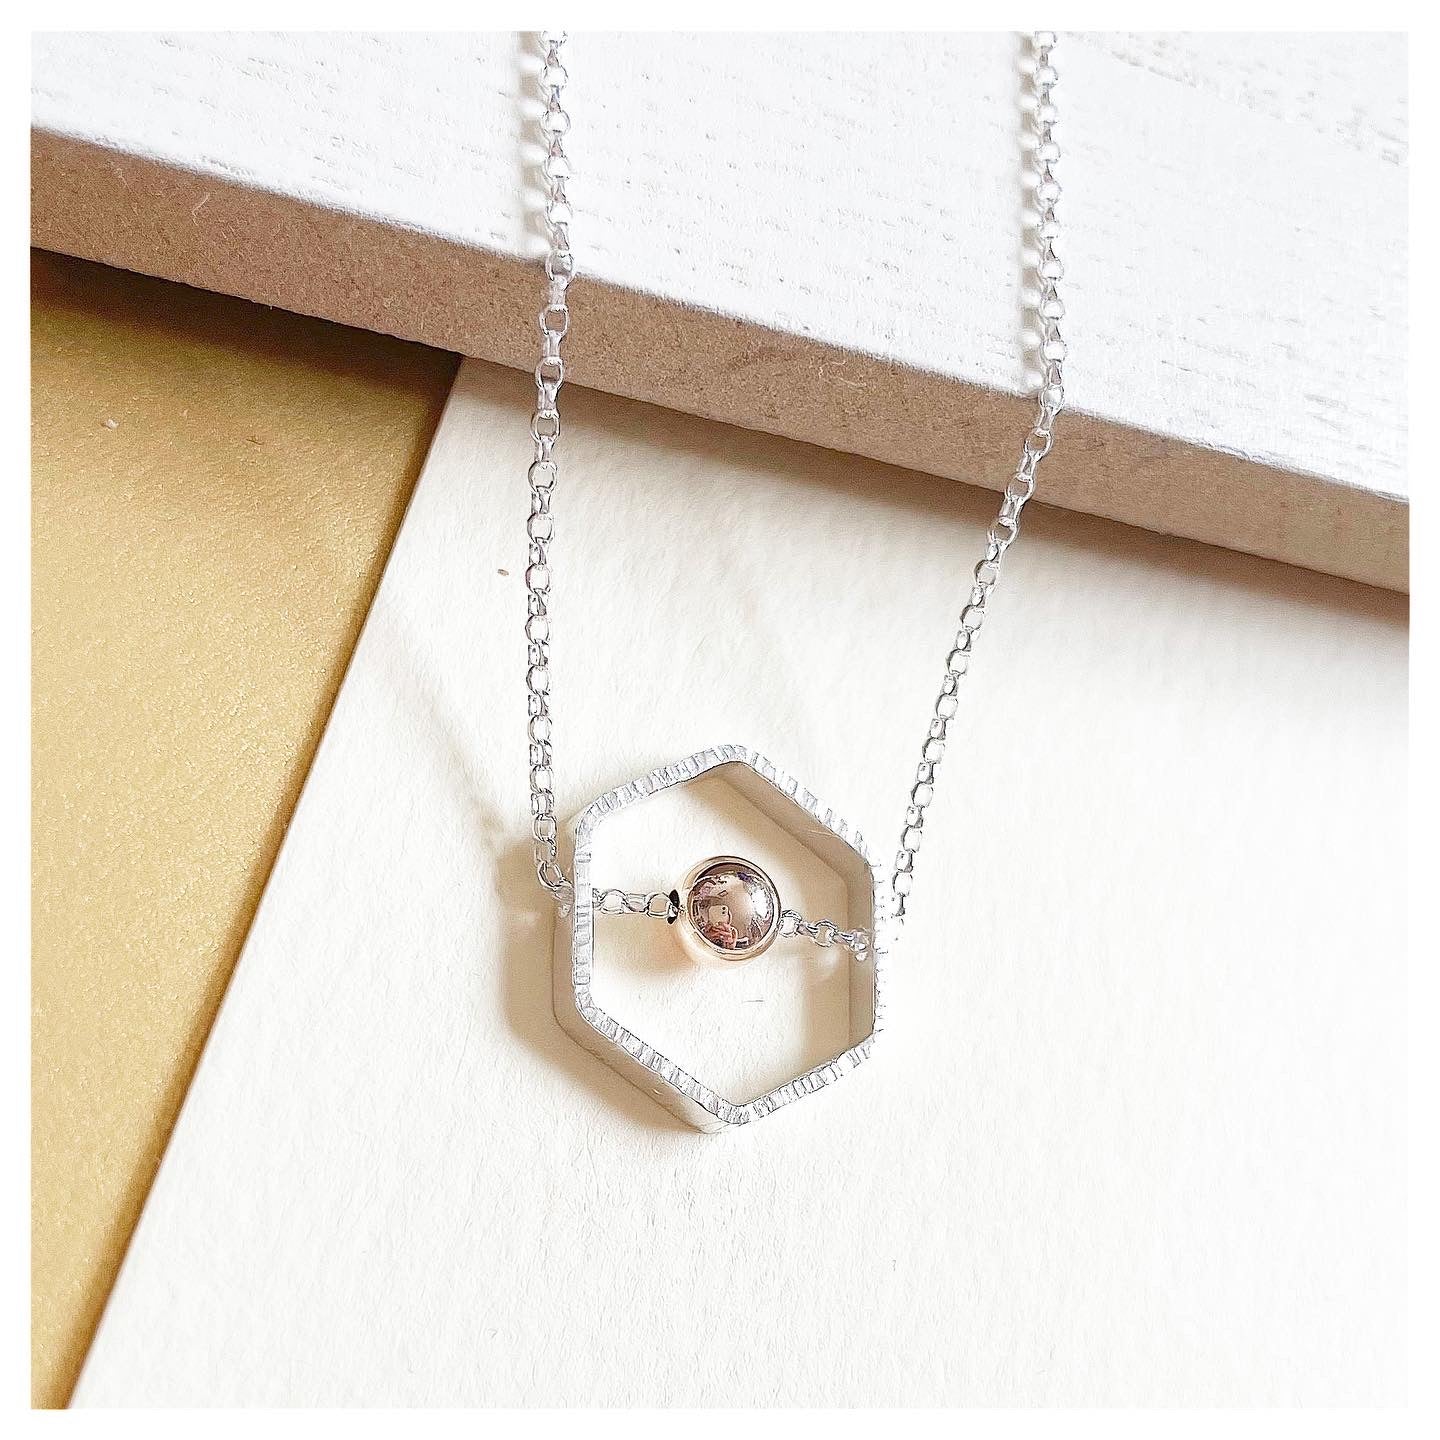 9ct Yellow Gold and Sterling Silver Hexagonal Necklace with Bead